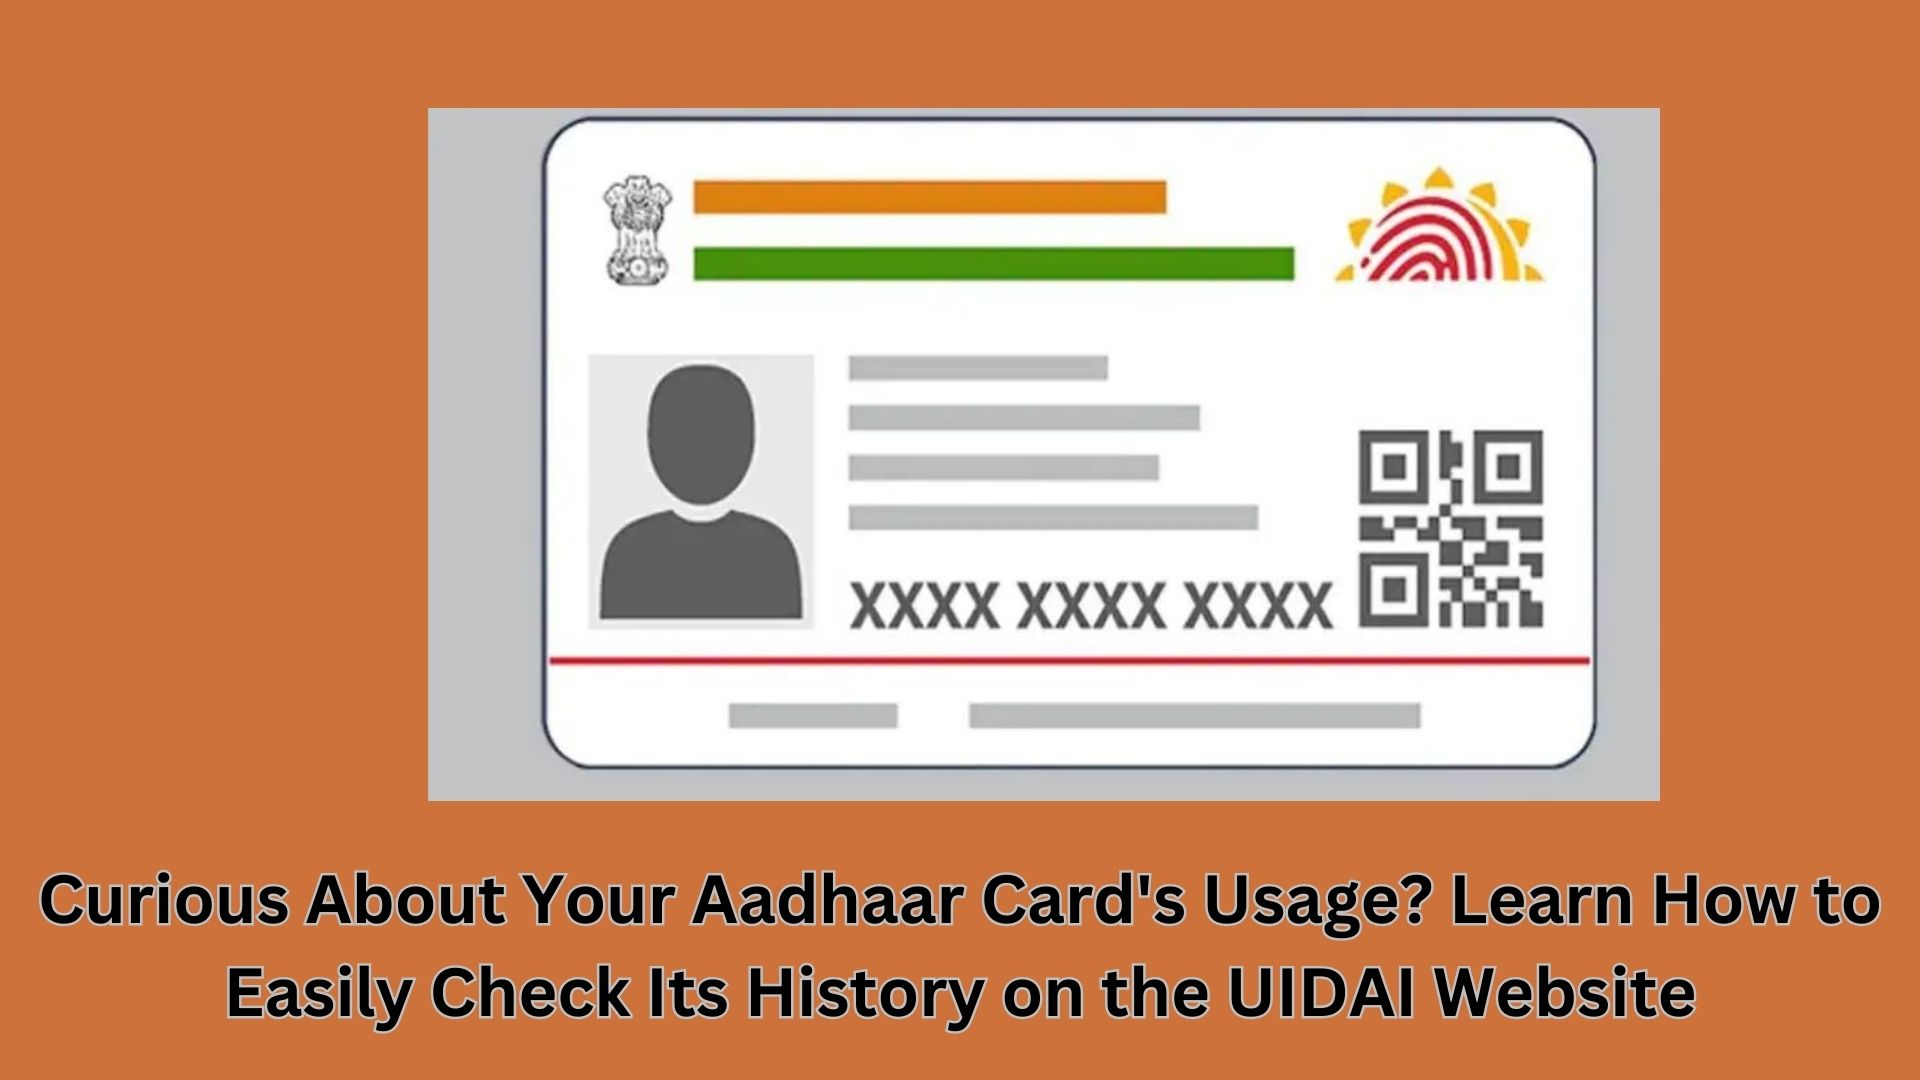 Curious About Your Aadhaar Card's Usage? Learn How to Easily Check Its History on the UIDAI Website